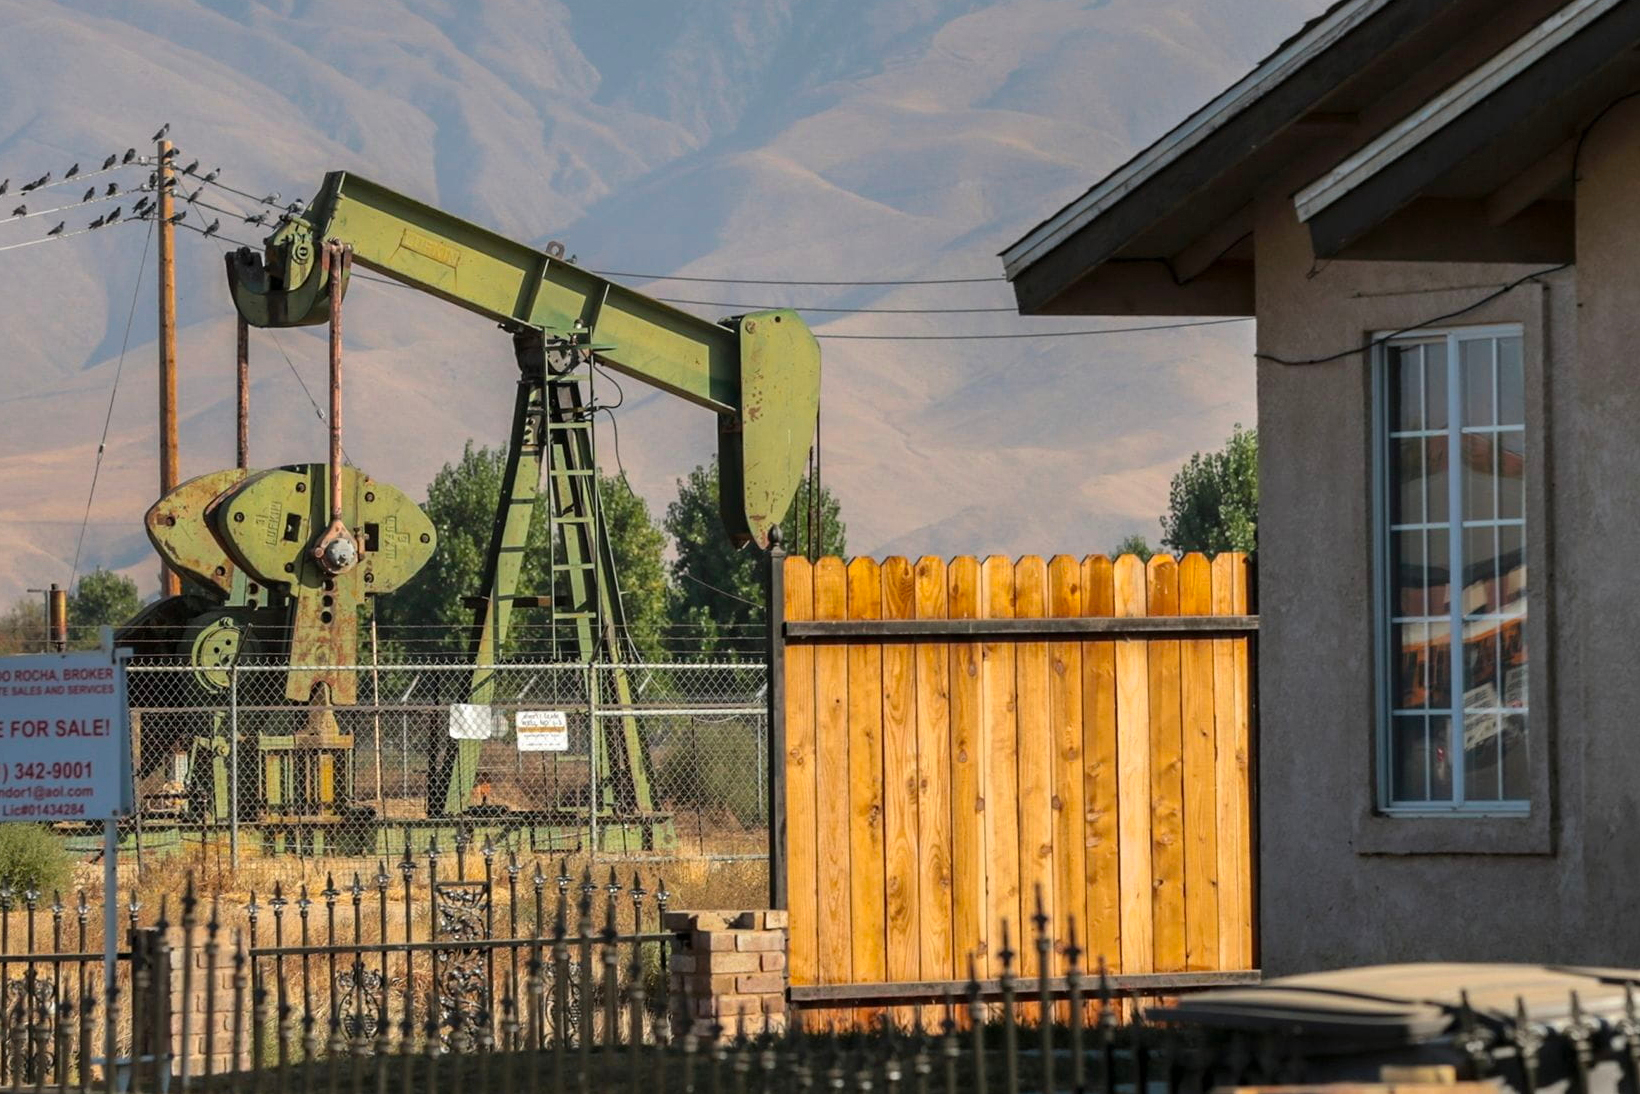 Oil wells in California neighborhoods: Search our map - Los ...